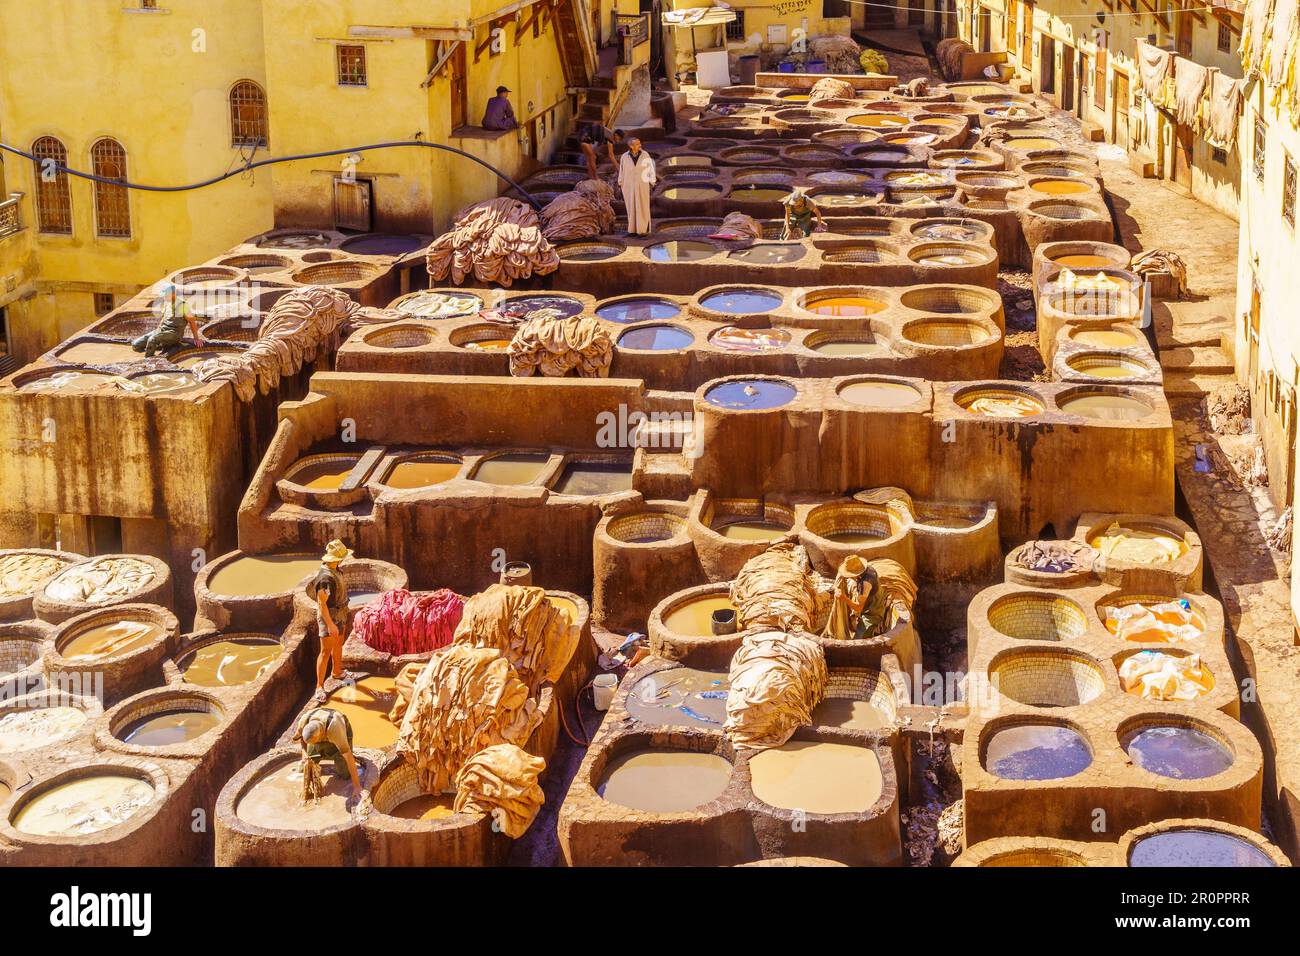 Fes, Morocco - March 31, 2023: View of the leather tannery with stone vats filled with various colors, and workers. Fes, Morocco Stock Photo